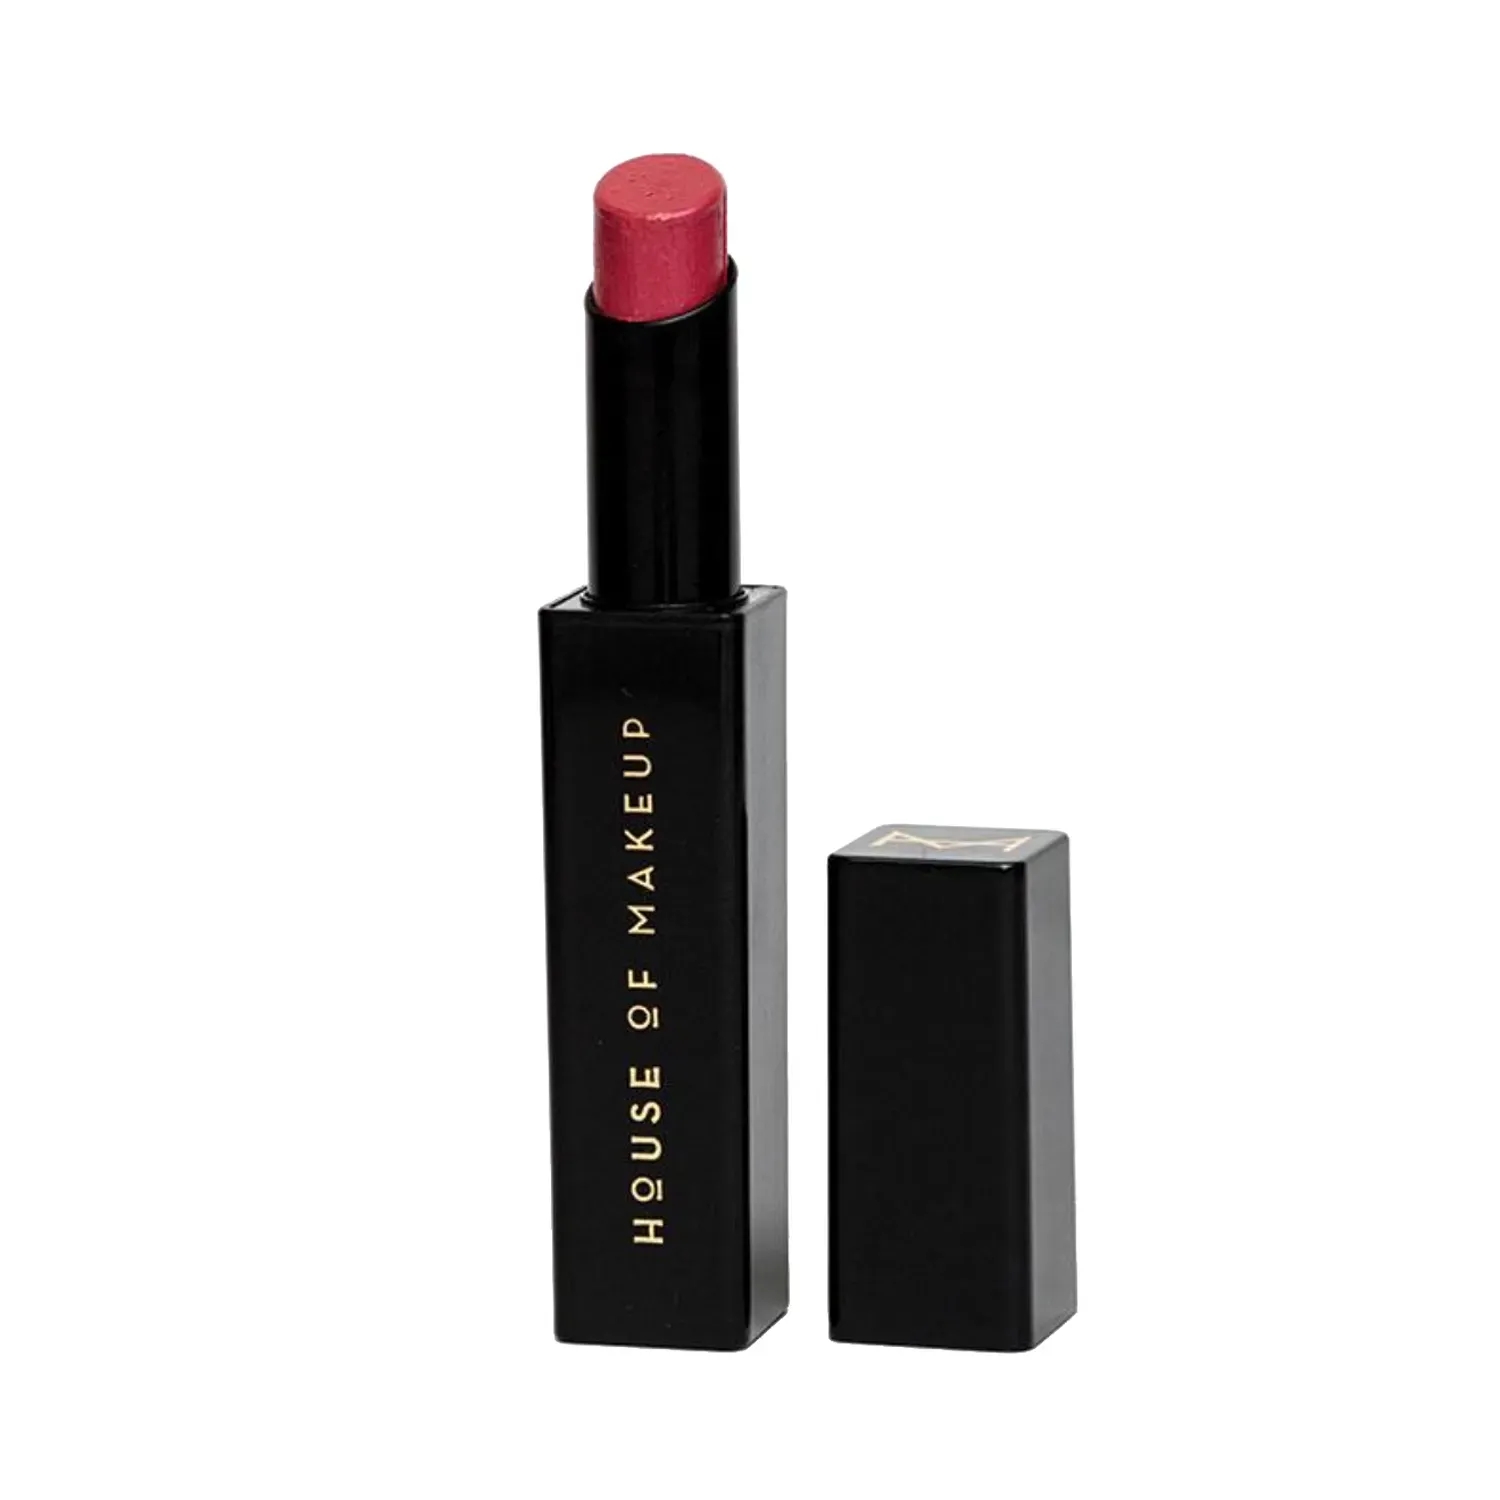 HOUSE OF MAKEUP | HOUSE OF MAKEUP Good On You Hydra Matte Lipstick - Taupe Notch Rosey (3.5g)